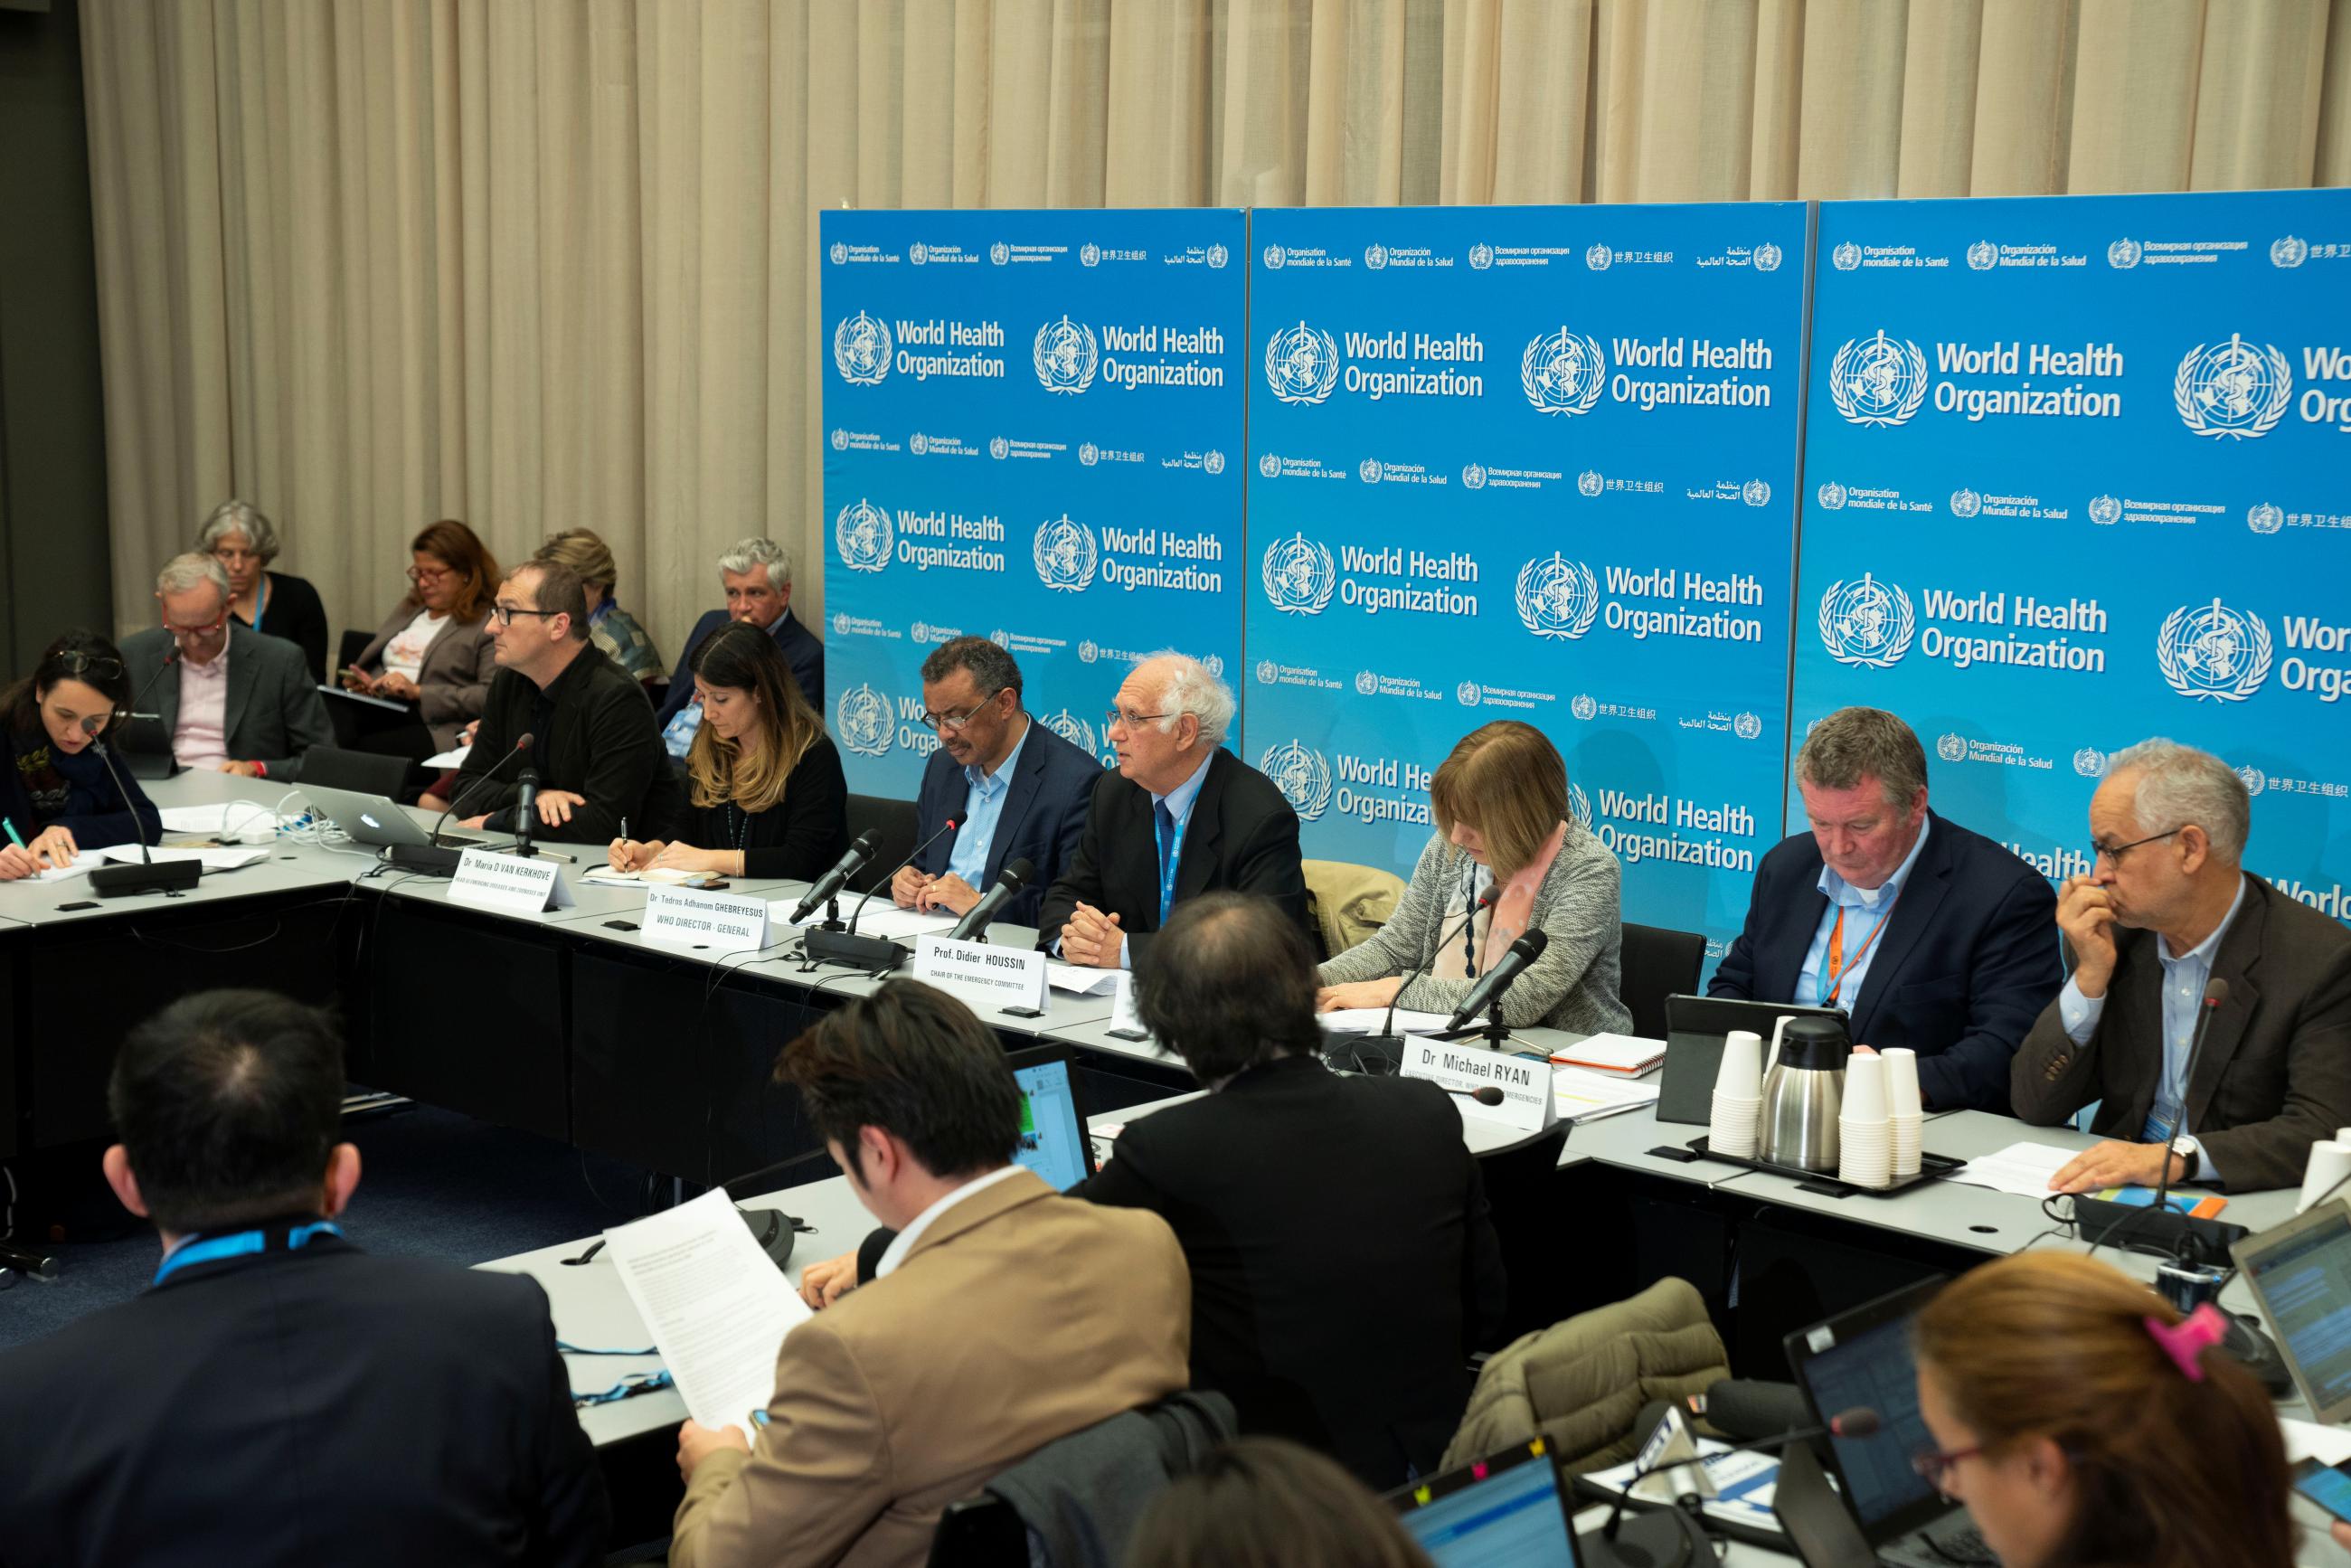 A news conference following the second meeting of the International Health Regulations (IHR) Emergency Committee for Pneumonia due to the Novel Coronavirus 2019-nCoV in Geneva, Switzerland, on January 23, 2020. Christopher Black/WHO